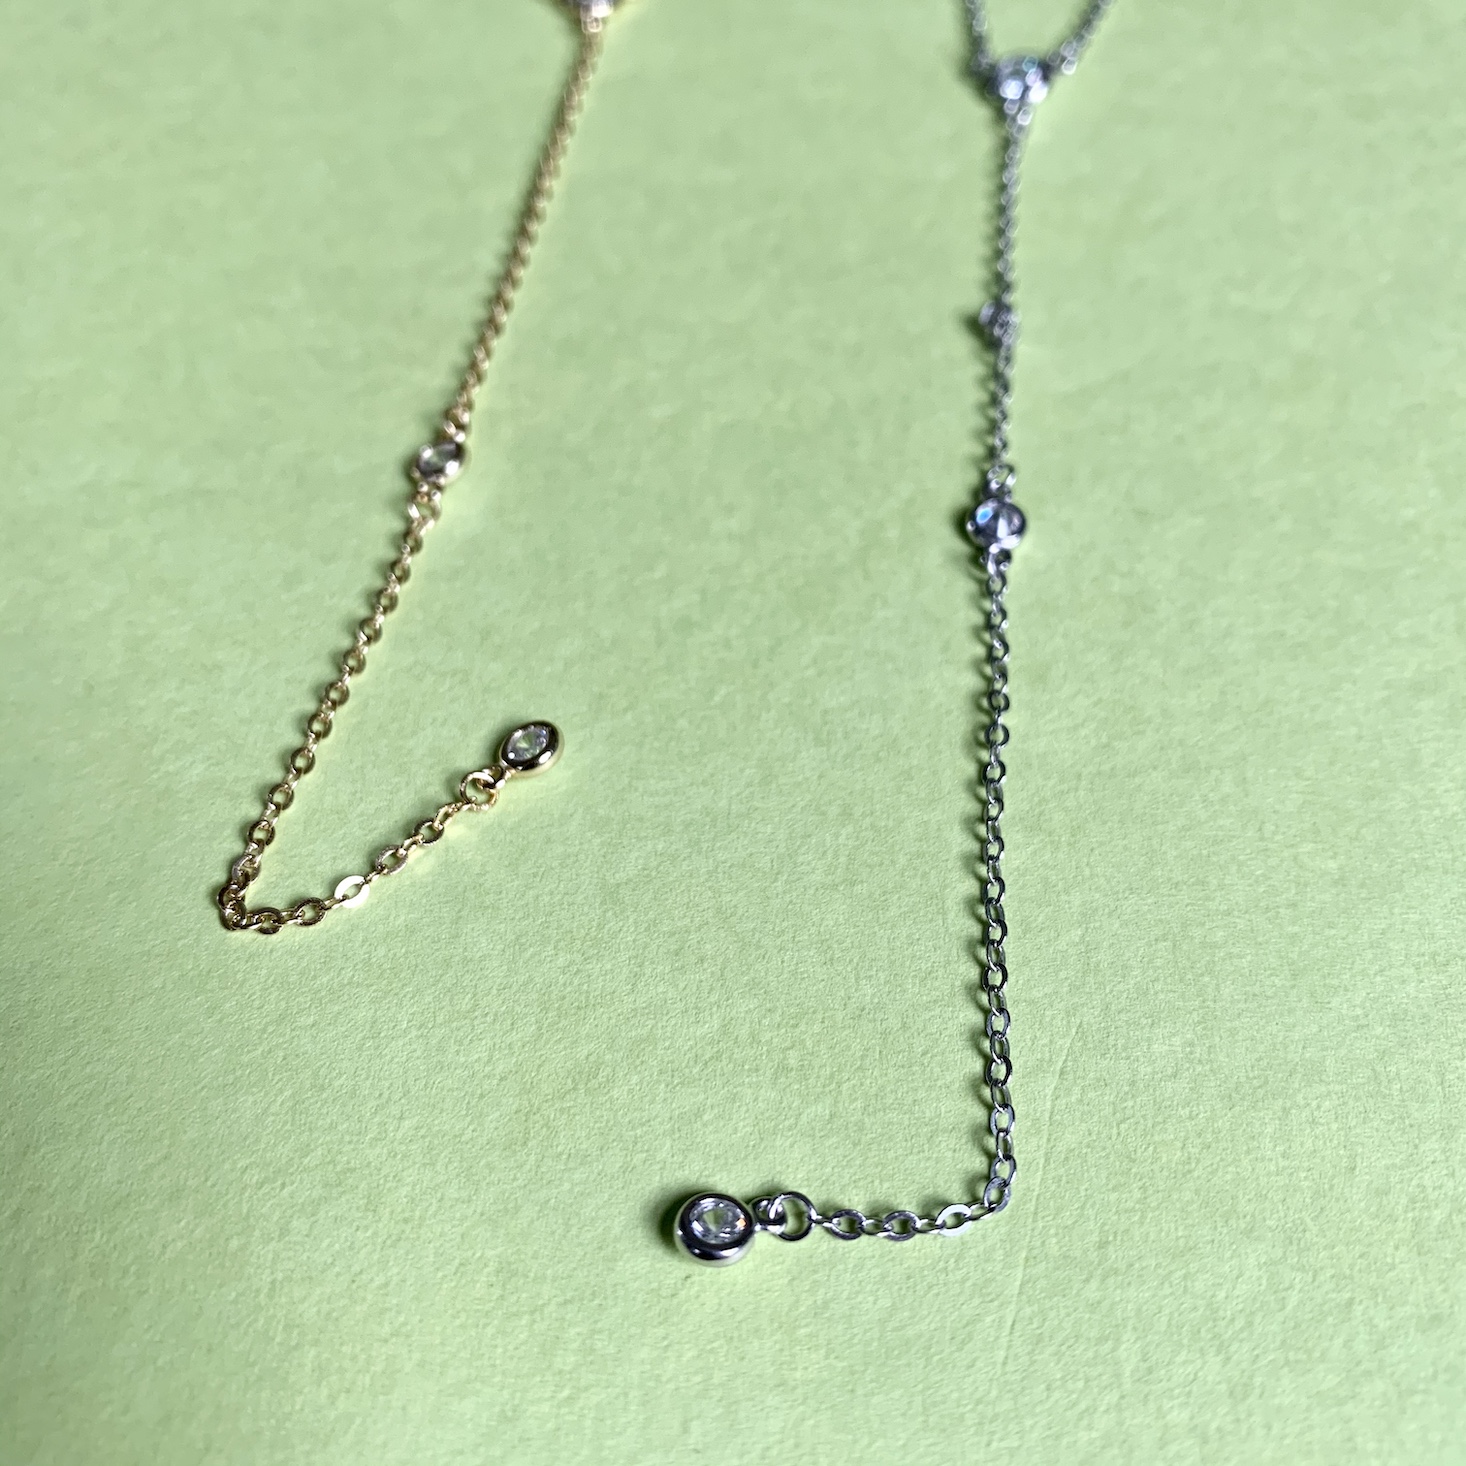 XIO Jewelry Subscription Review + Coupon - October 2019 | MSA